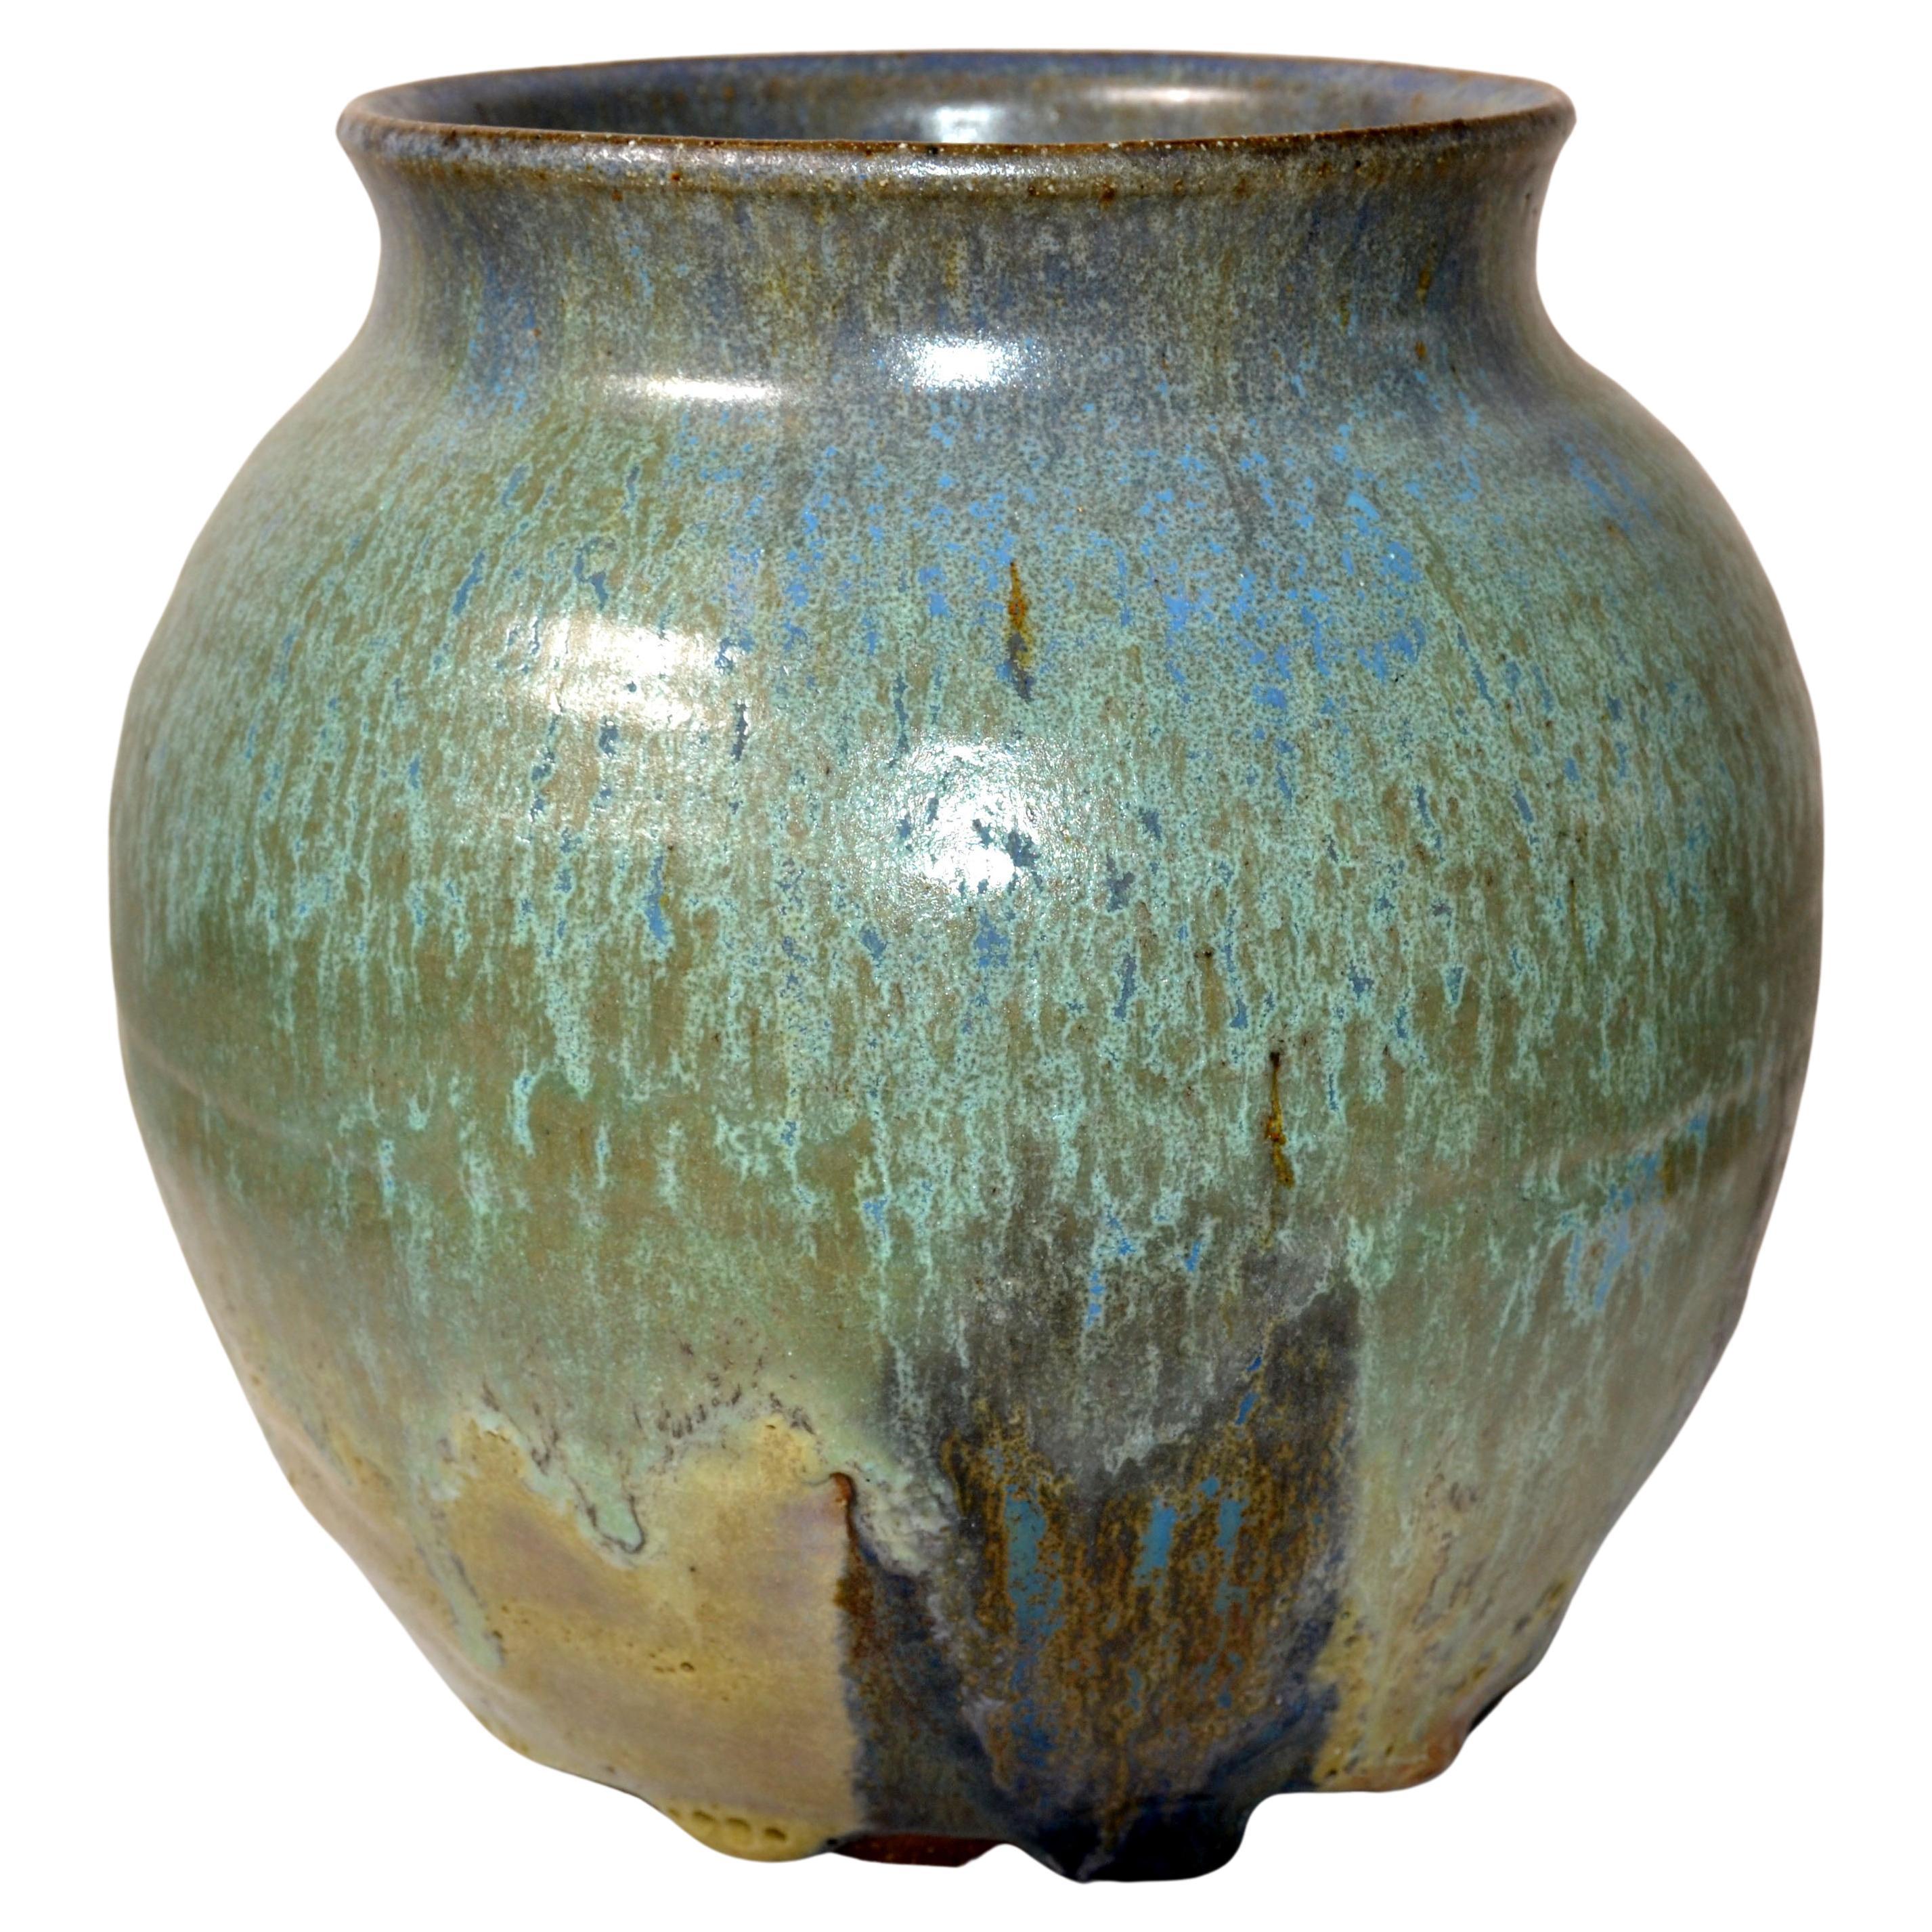 Signed Joseph glazed grey, mint green, blue and brown, green Pottery ceramic bowl, vase, vessel.
Signed by Artist at the base. Joseph, 11/69.
This bowl is perfect on display or used as a vase on an entry table.